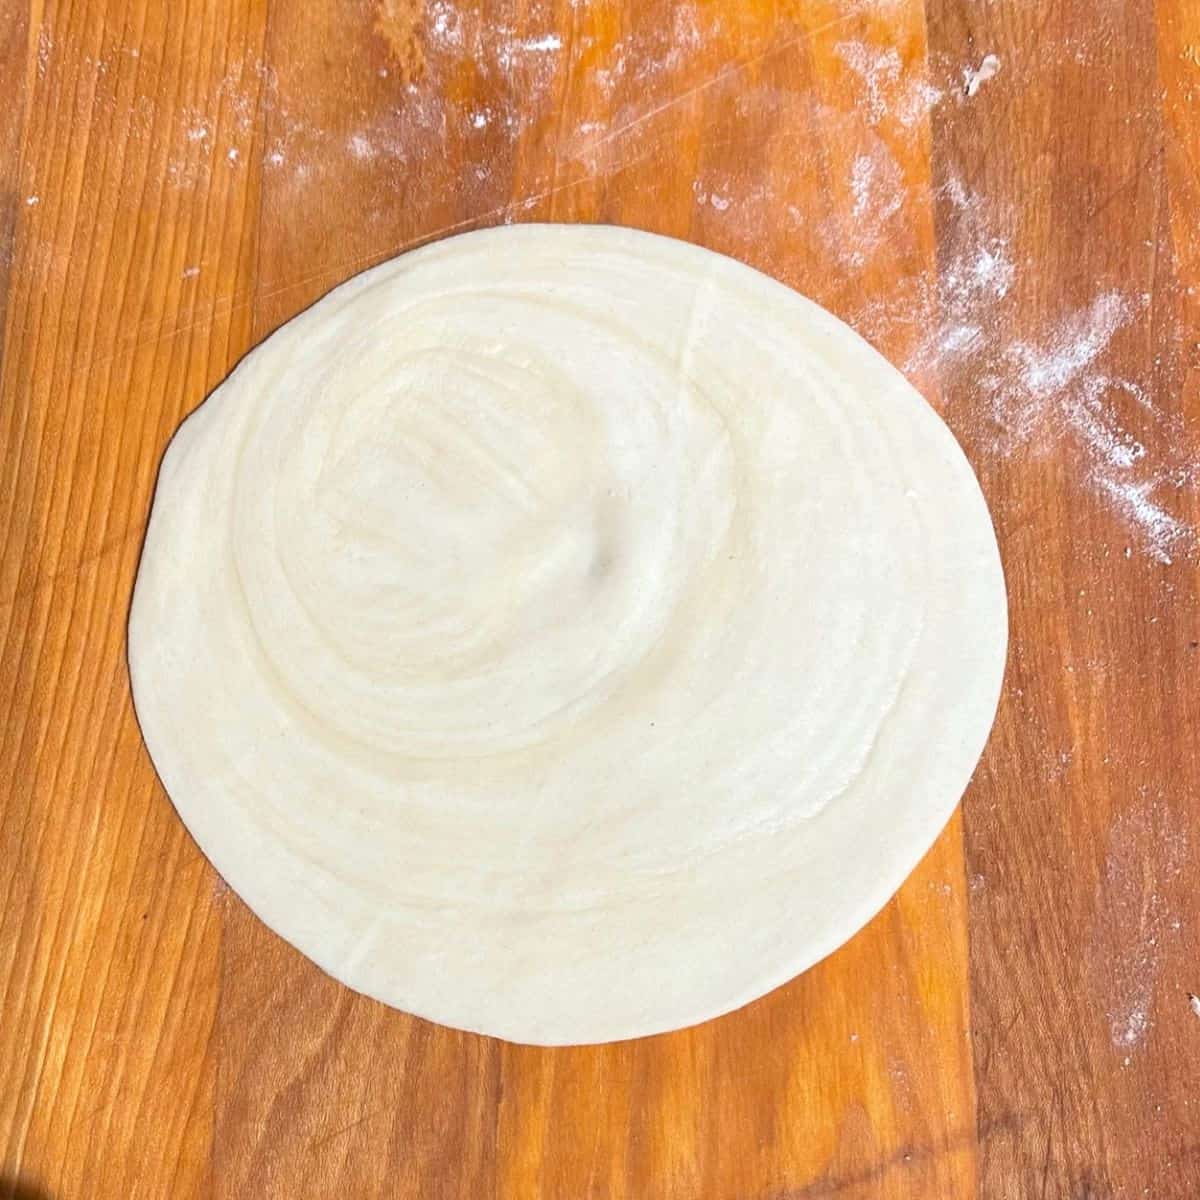 Paratha after rolling on wooden board.